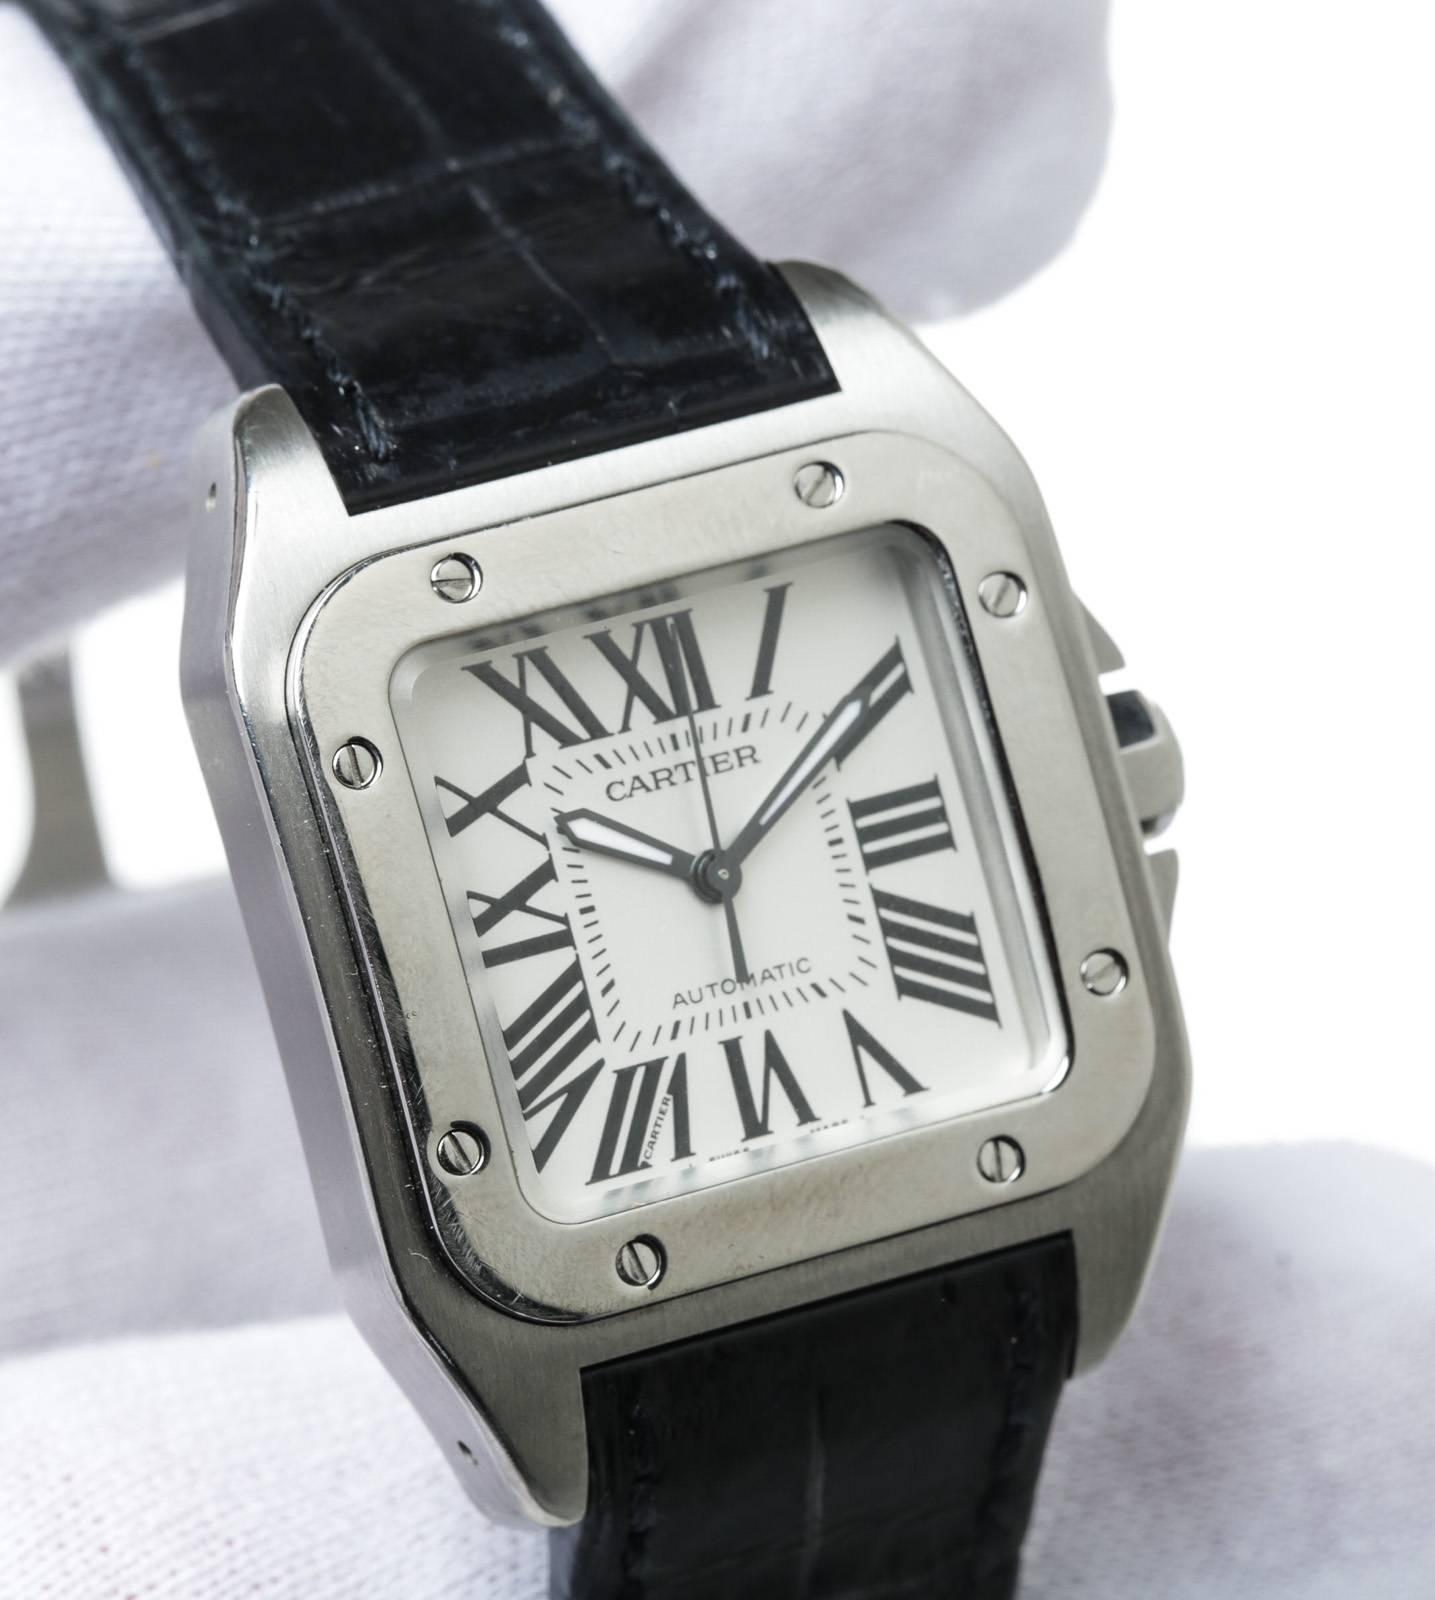  Cartier Stainless Steel Santos 100 Wristwatch For Sale 4